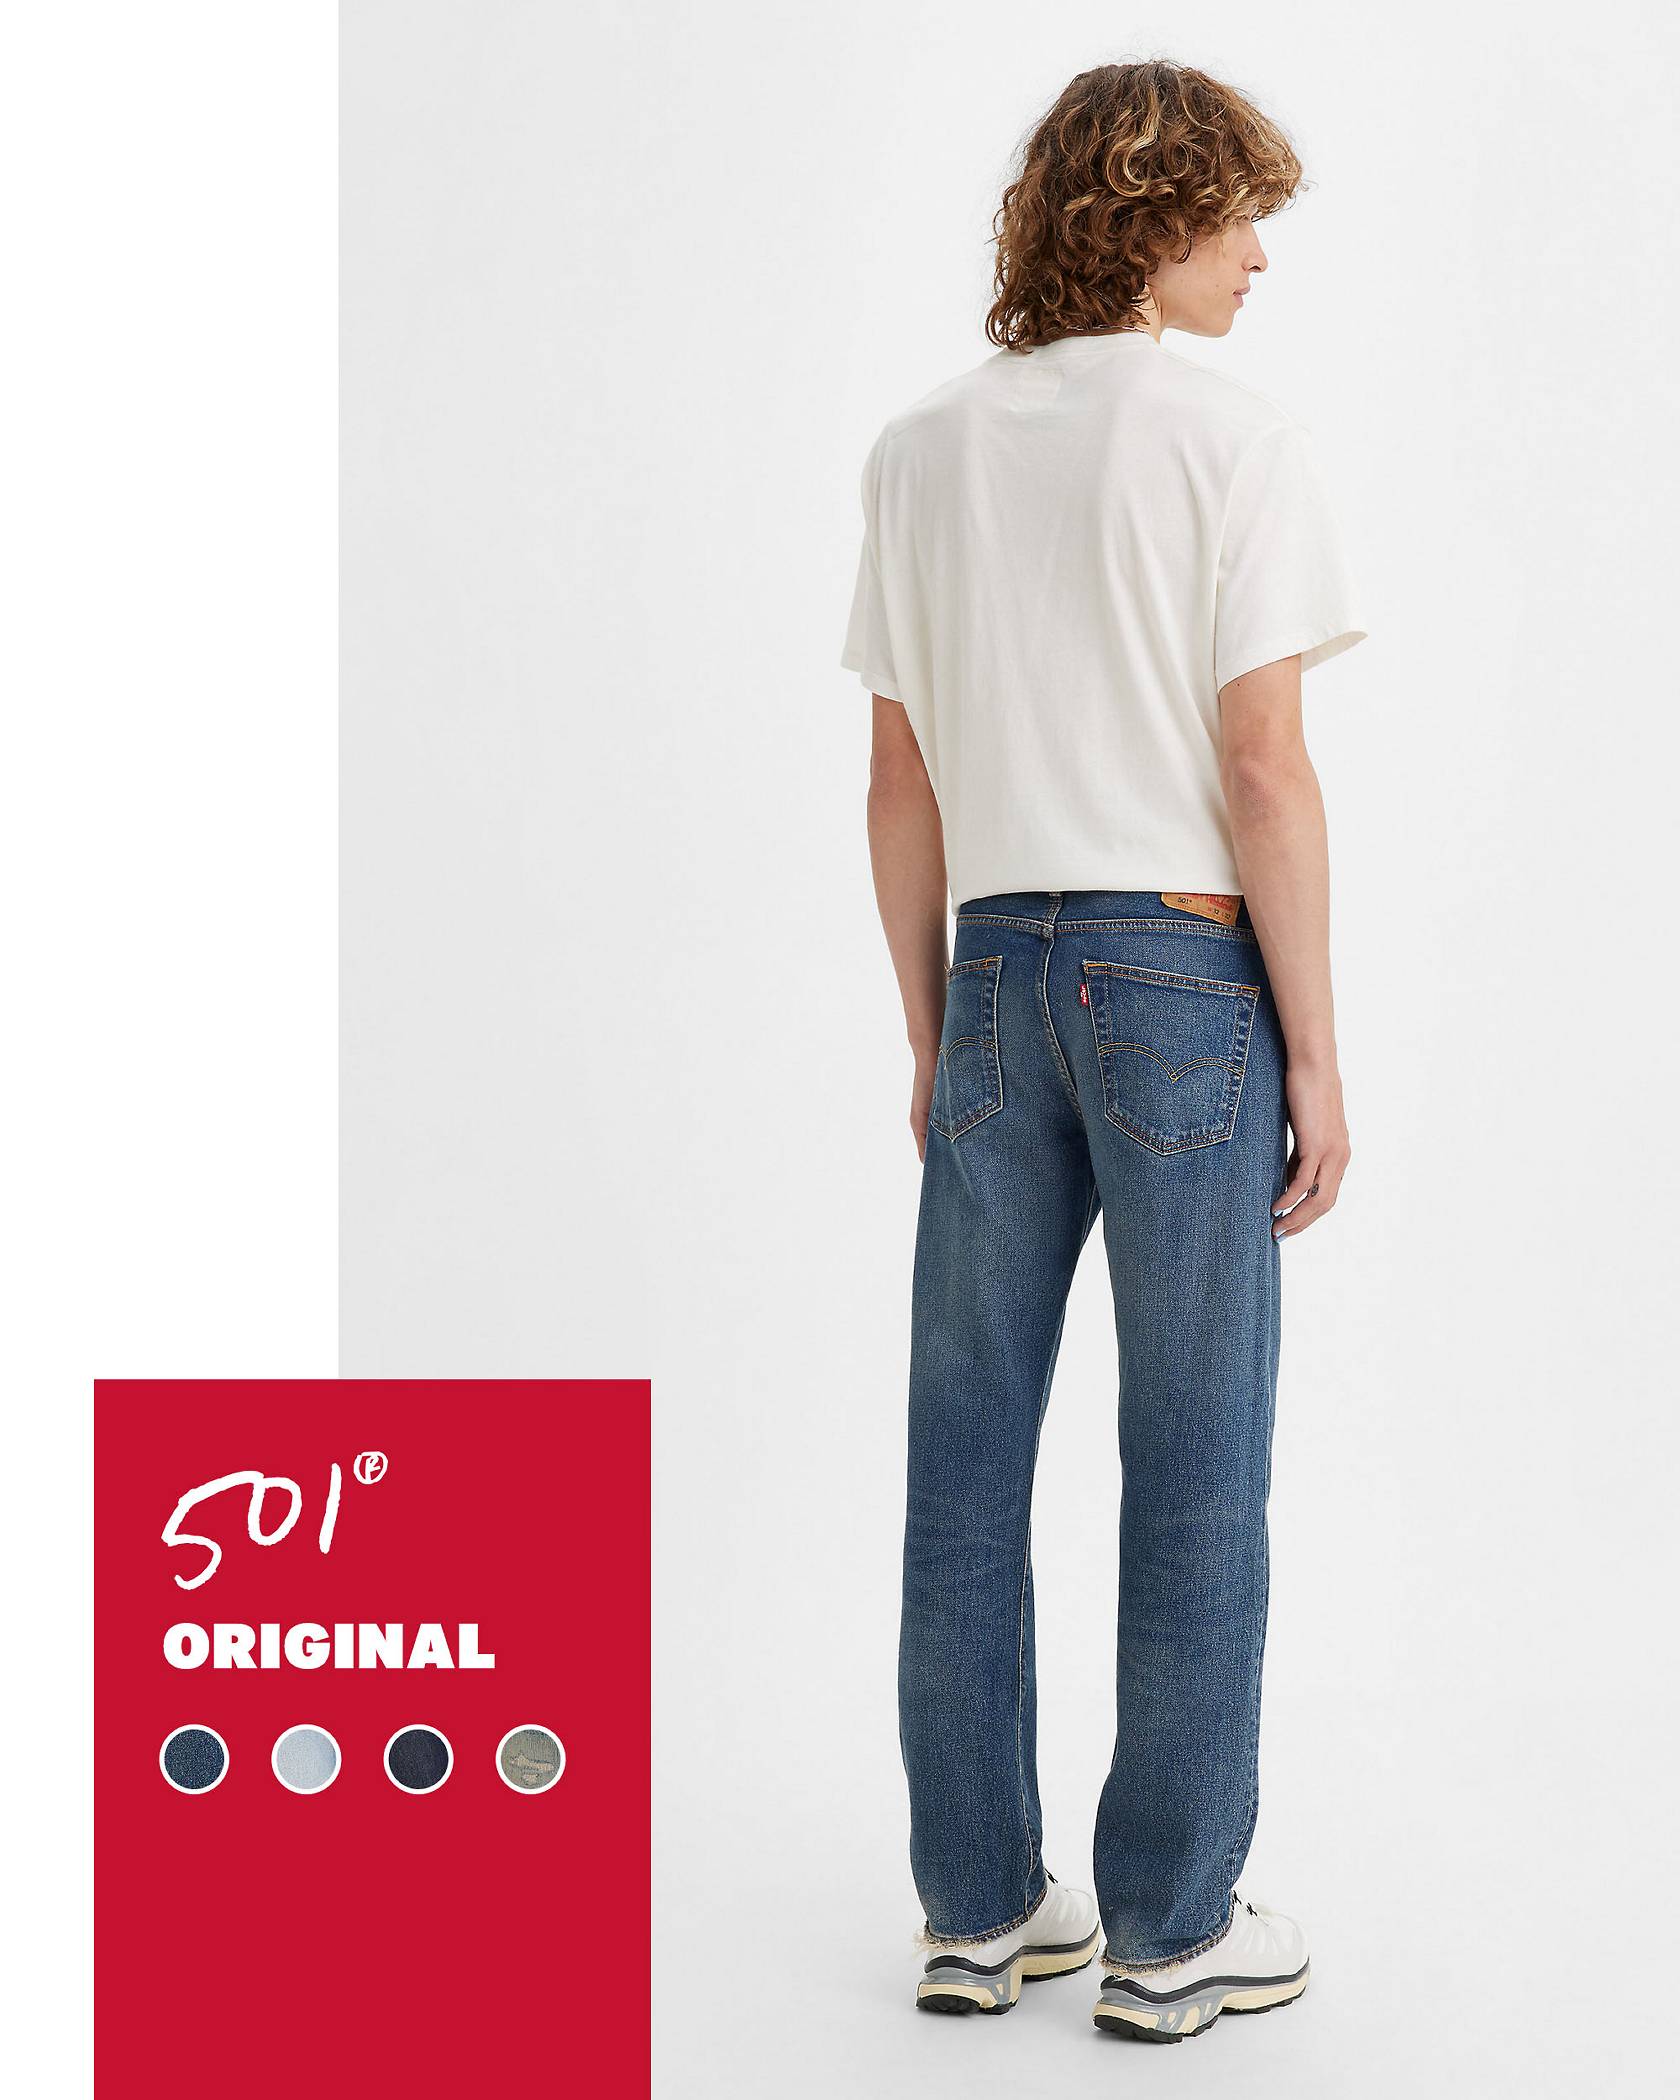 Paneled shot of model in medium wash 501® Original jeans with a red tag displaying product name and sample color swatches